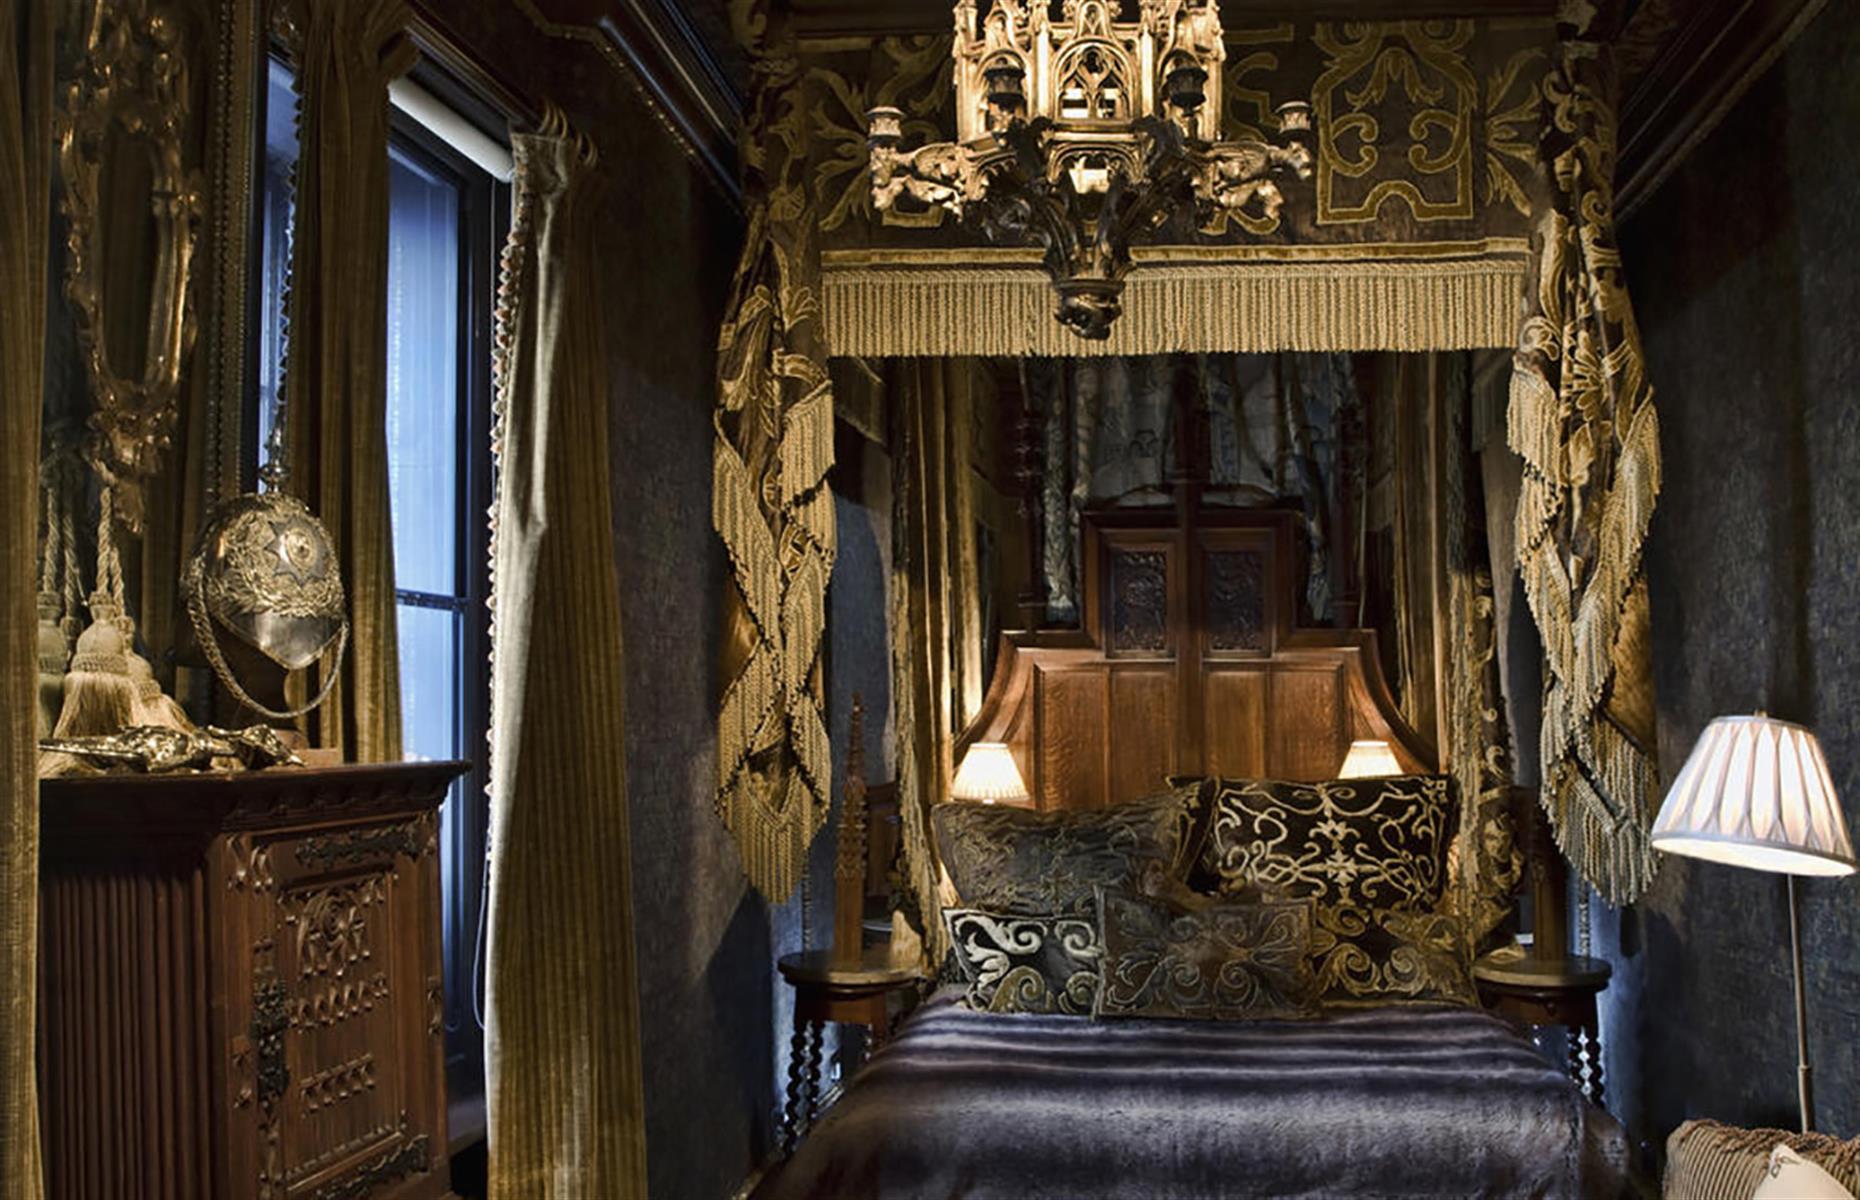 <p>The lavishly decorated, baroque-inspired <a href="https://www.booking.com/hotel/gb/the-witchery-by-the-castle.en-gb.html" rel="nofollow” target=">The Witchery by the Castle</a> is located just steps from the medieval Edinburgh Castle in Edinburgh, Scotland. Hidden away in the historic buildings of Castlehill, the hotel's nine suites are all individually and originally decorated with a common theme of glamorous Gothic drama. </p>